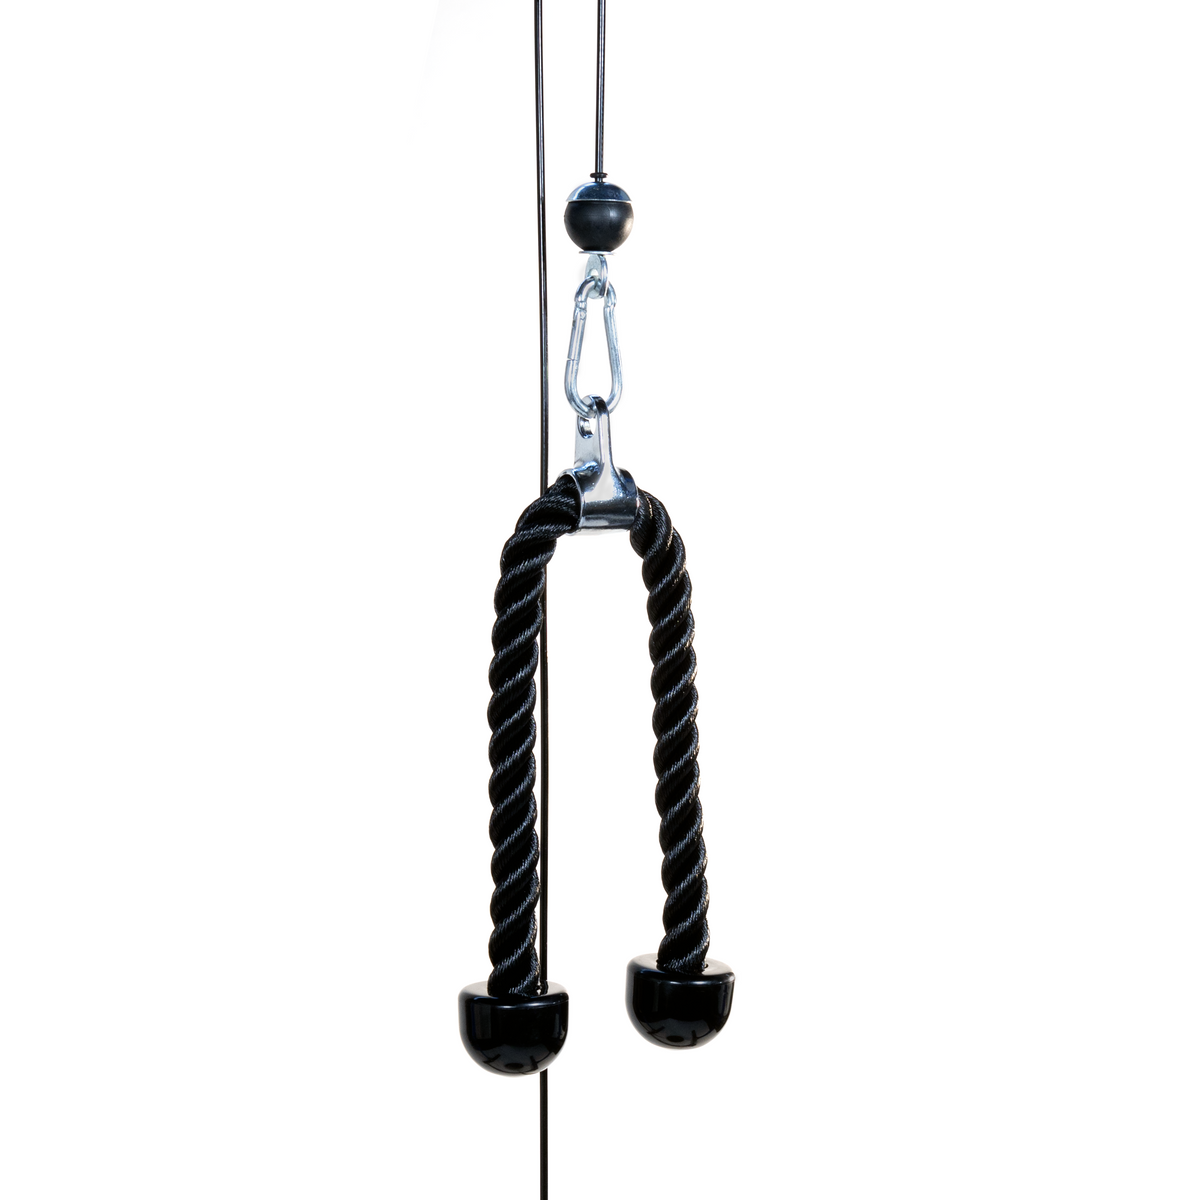 FitWay Equip. Universal Single Pulley Cable System 